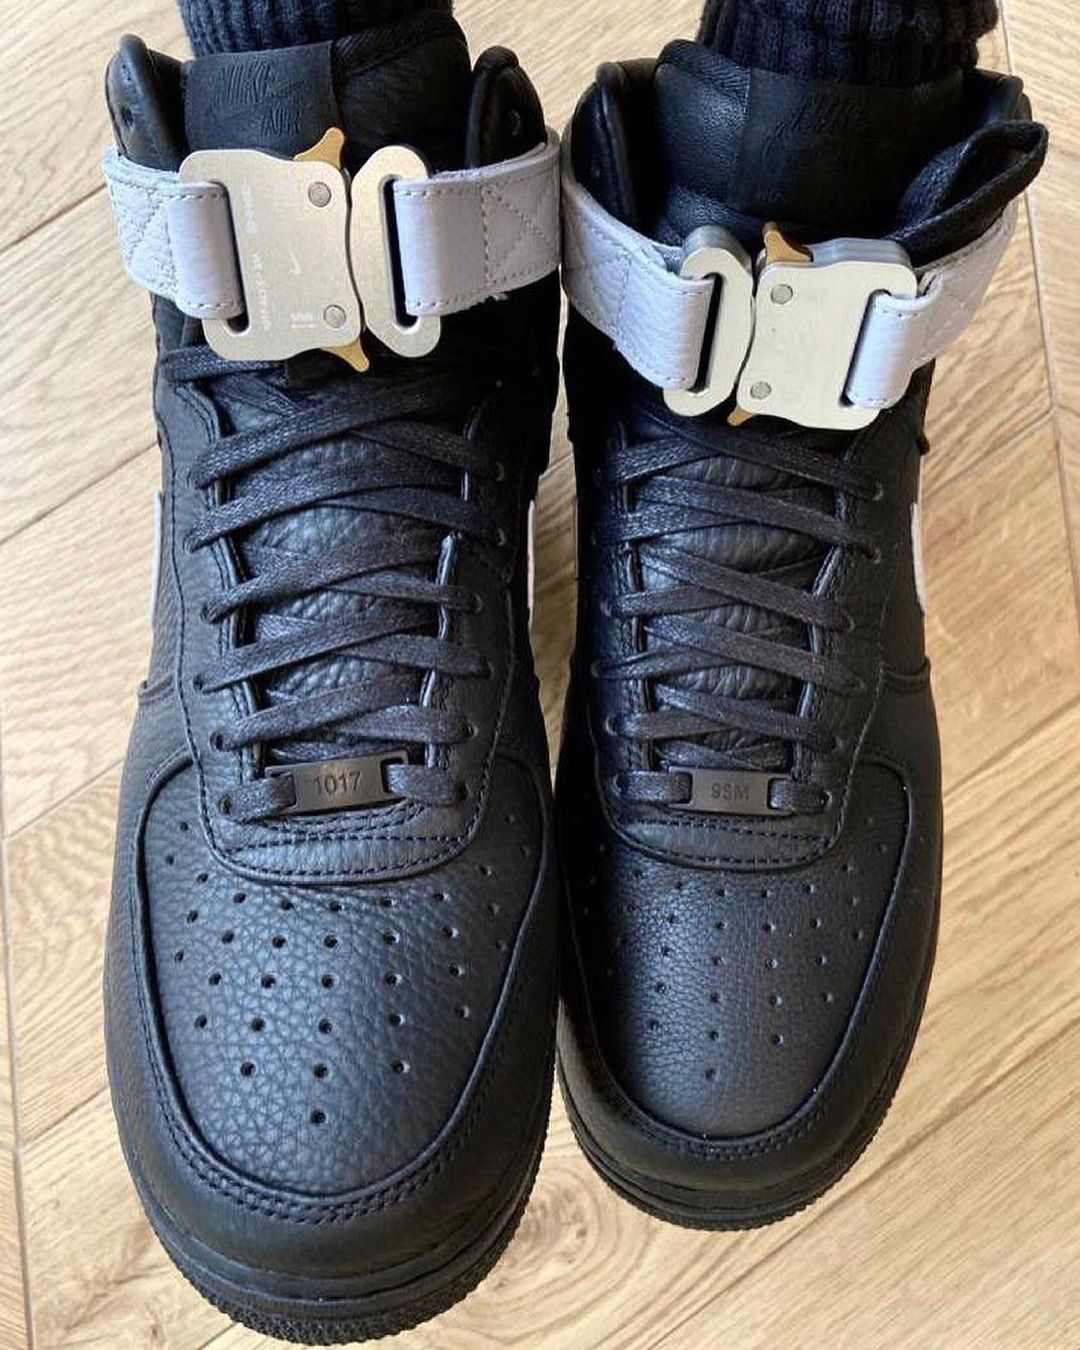 Matthew Williams Shares Images of New Nike X ALYX Air Force 1 ...